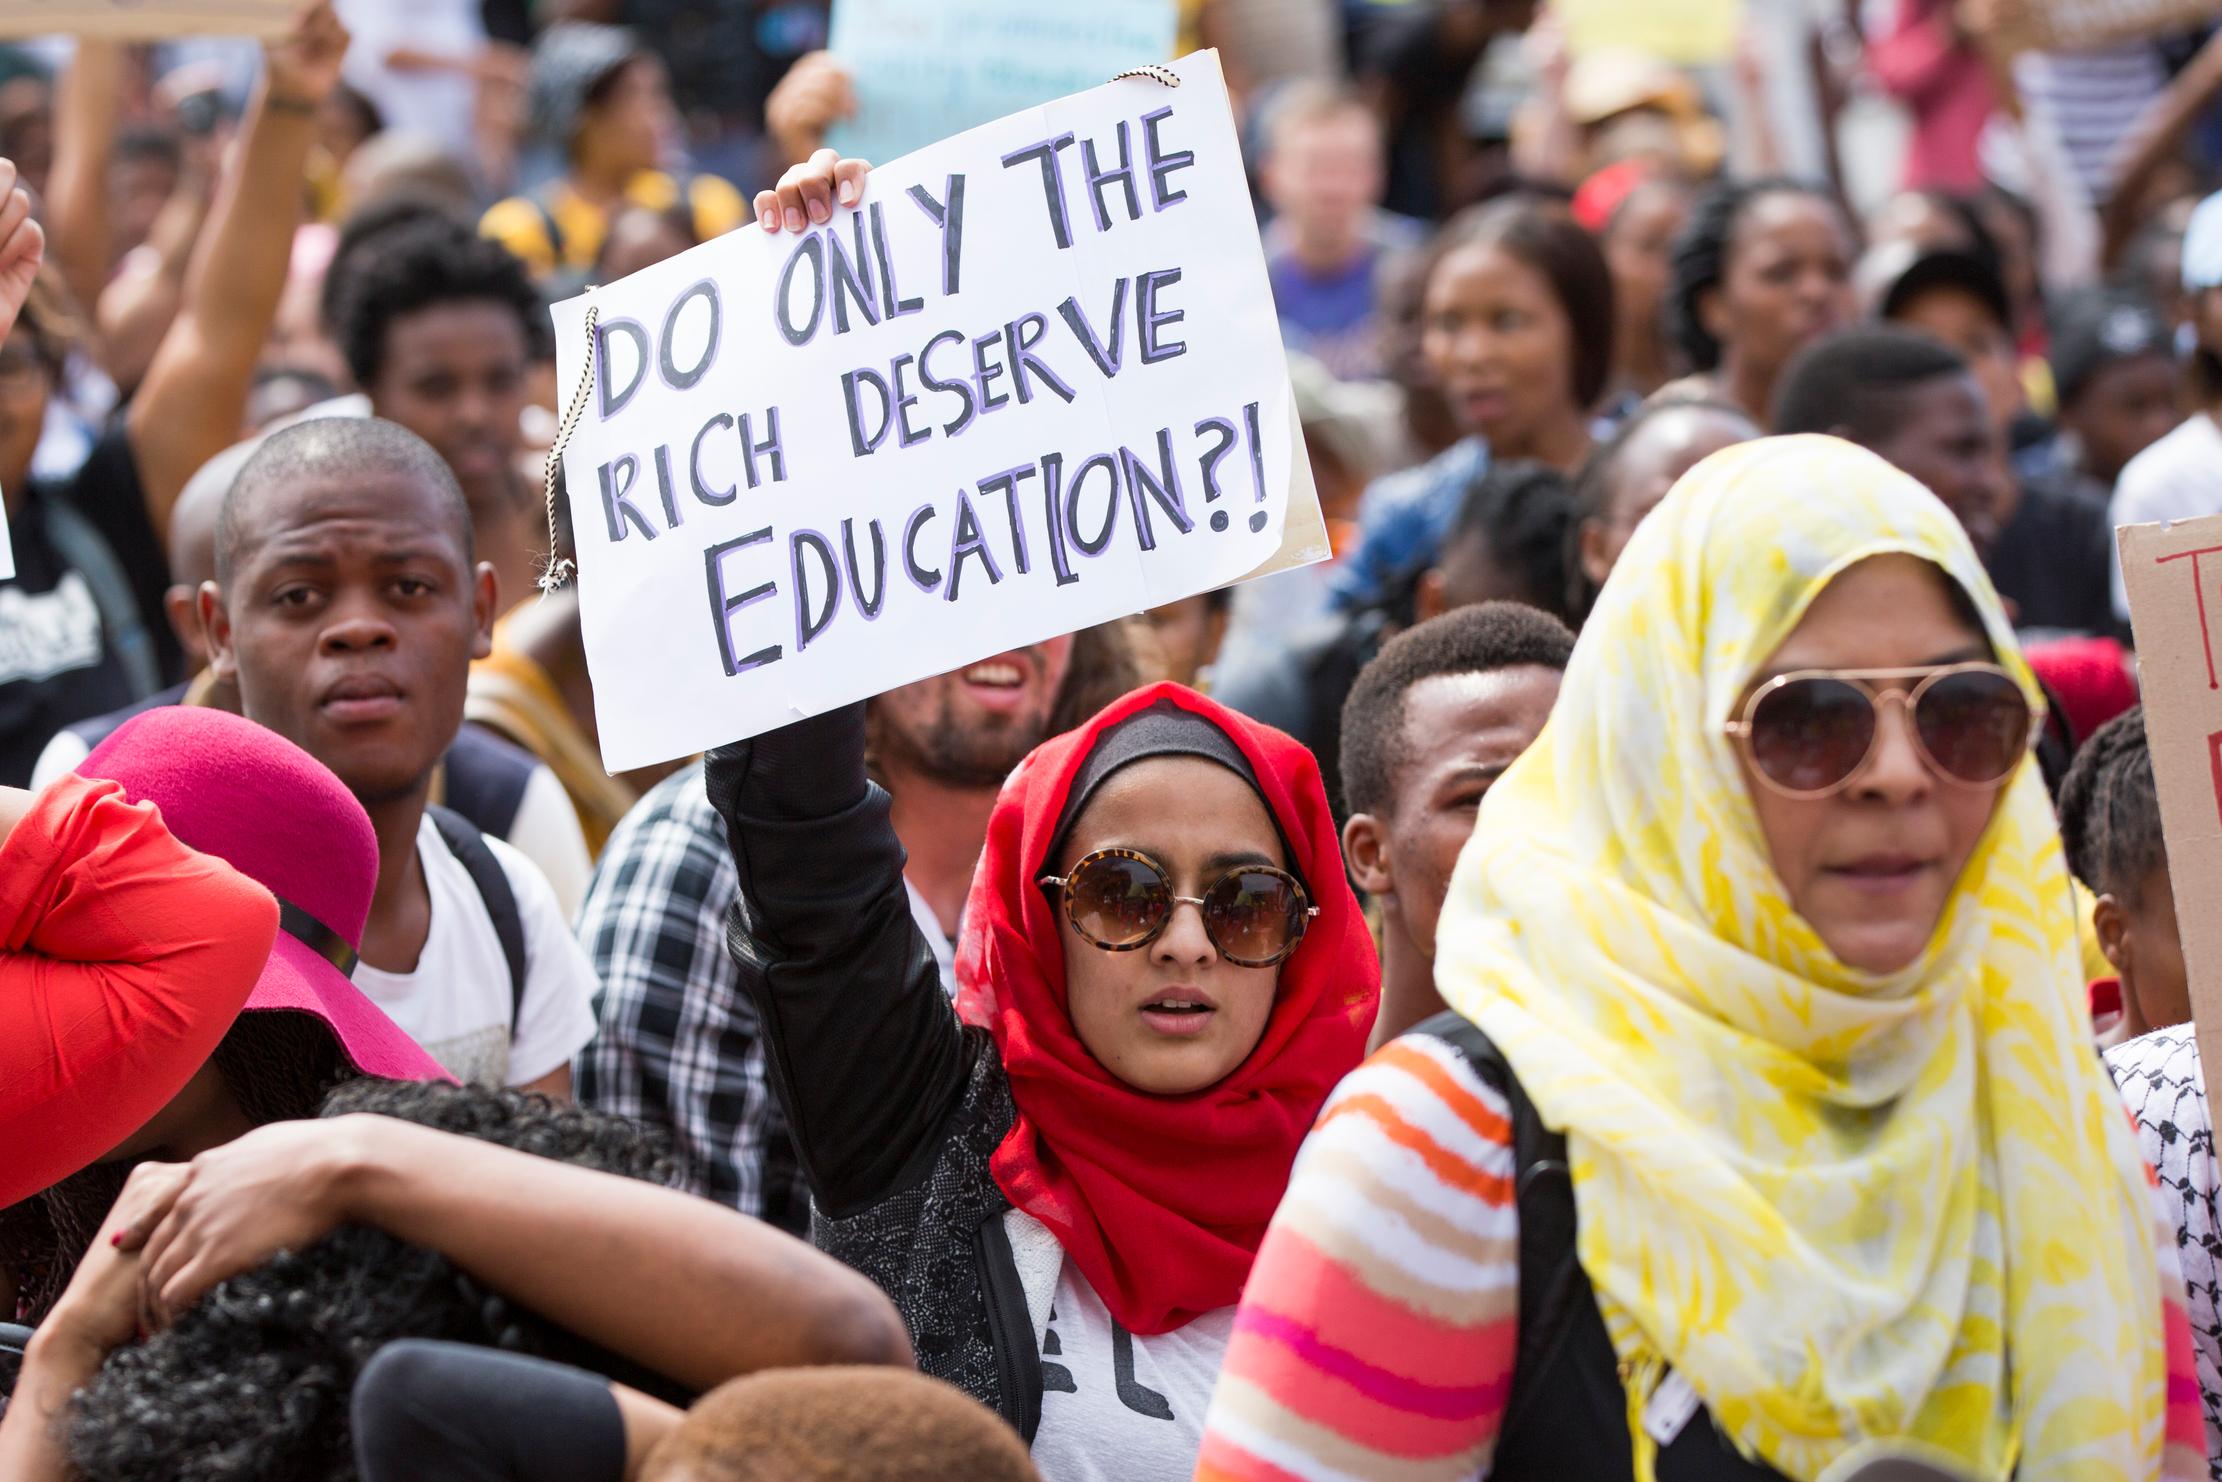 A group of people demonstrating, one with a sign questioning whether only the rich should have access to education.